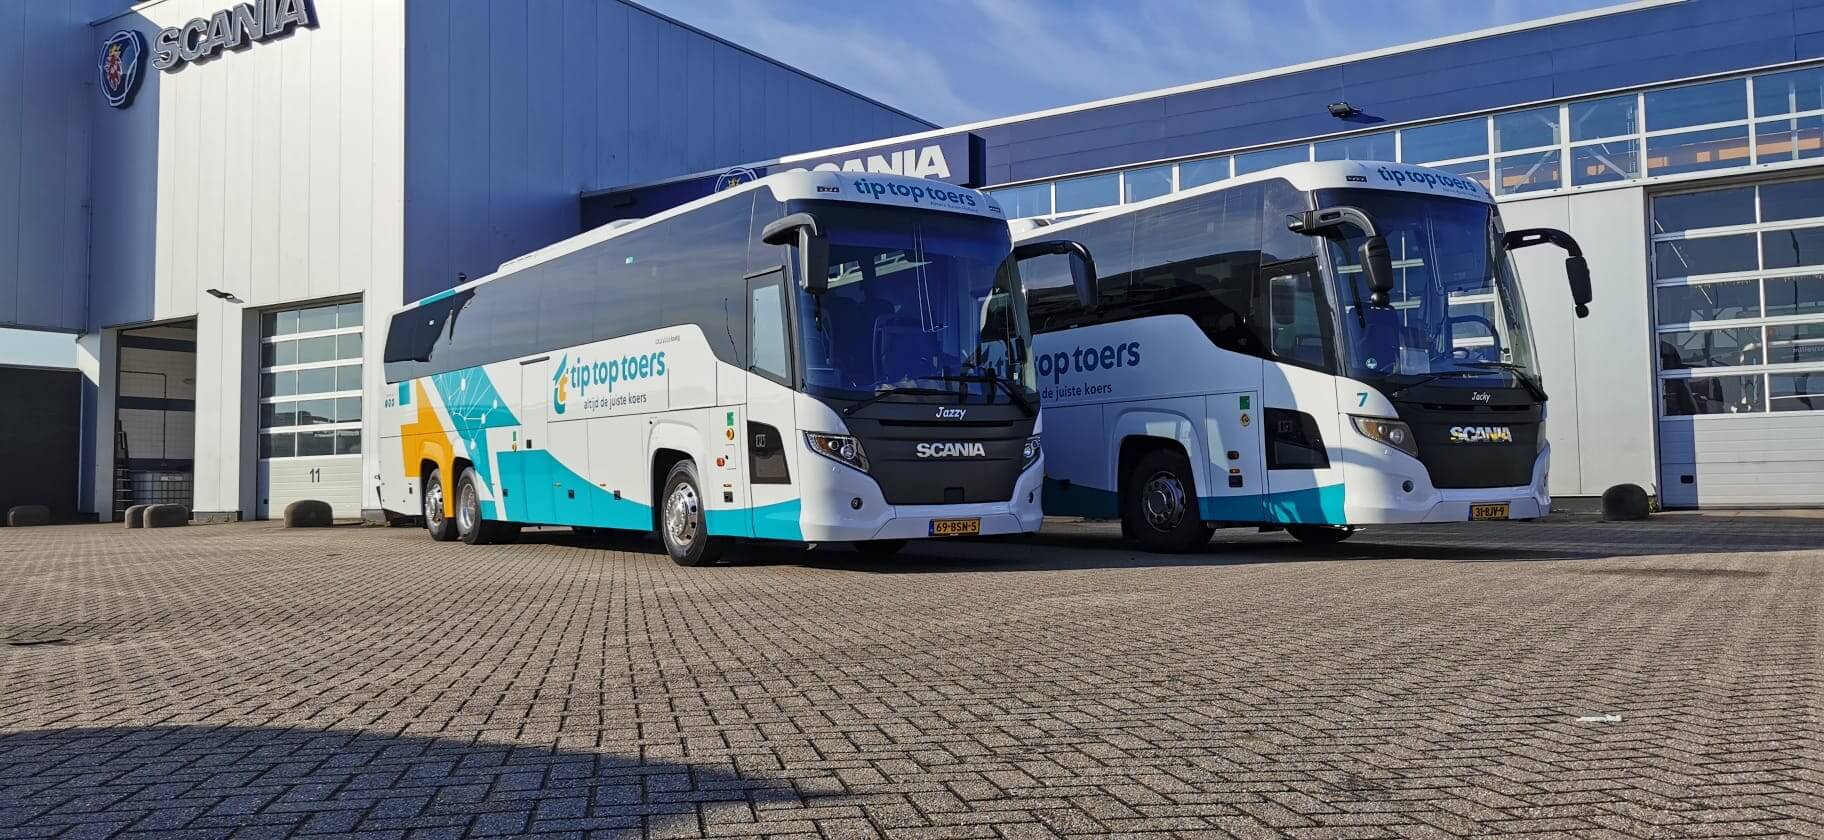 Rent a 58 seater Standard Coach (Scania  Touring 2011) from Tip Top Toers from Almere - Buiten 